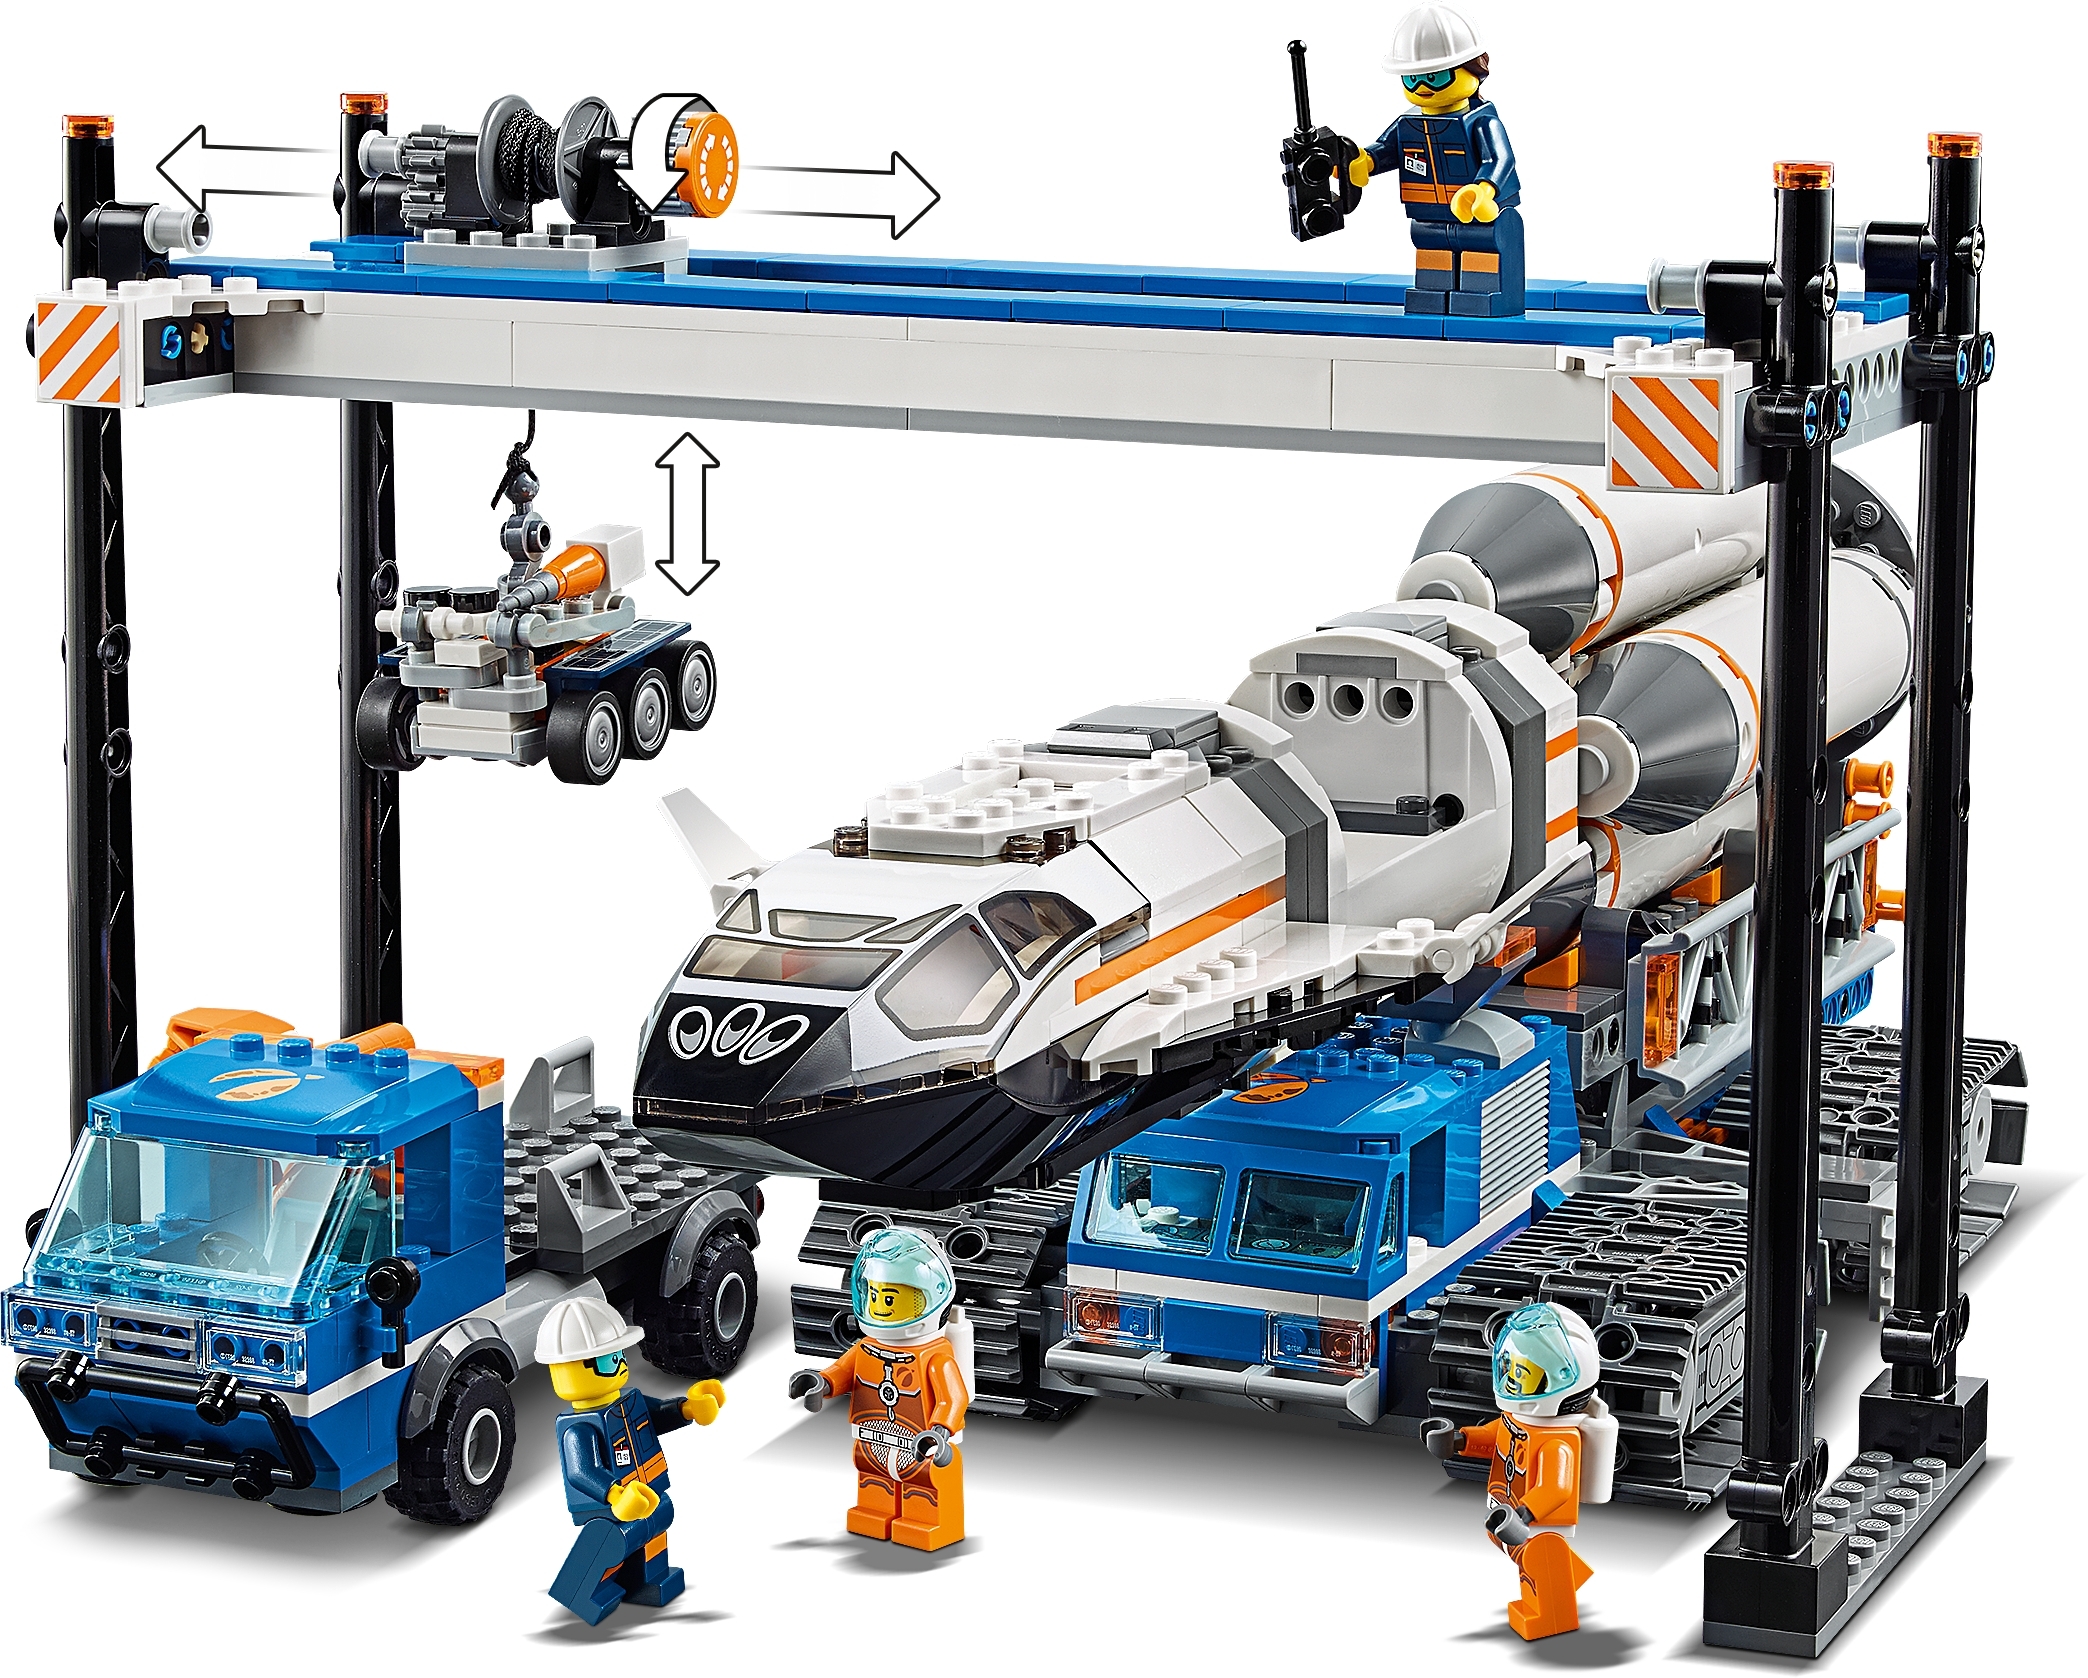 Assembly & Transport 60229 | City | Buy online at the Official LEGO® Shop US